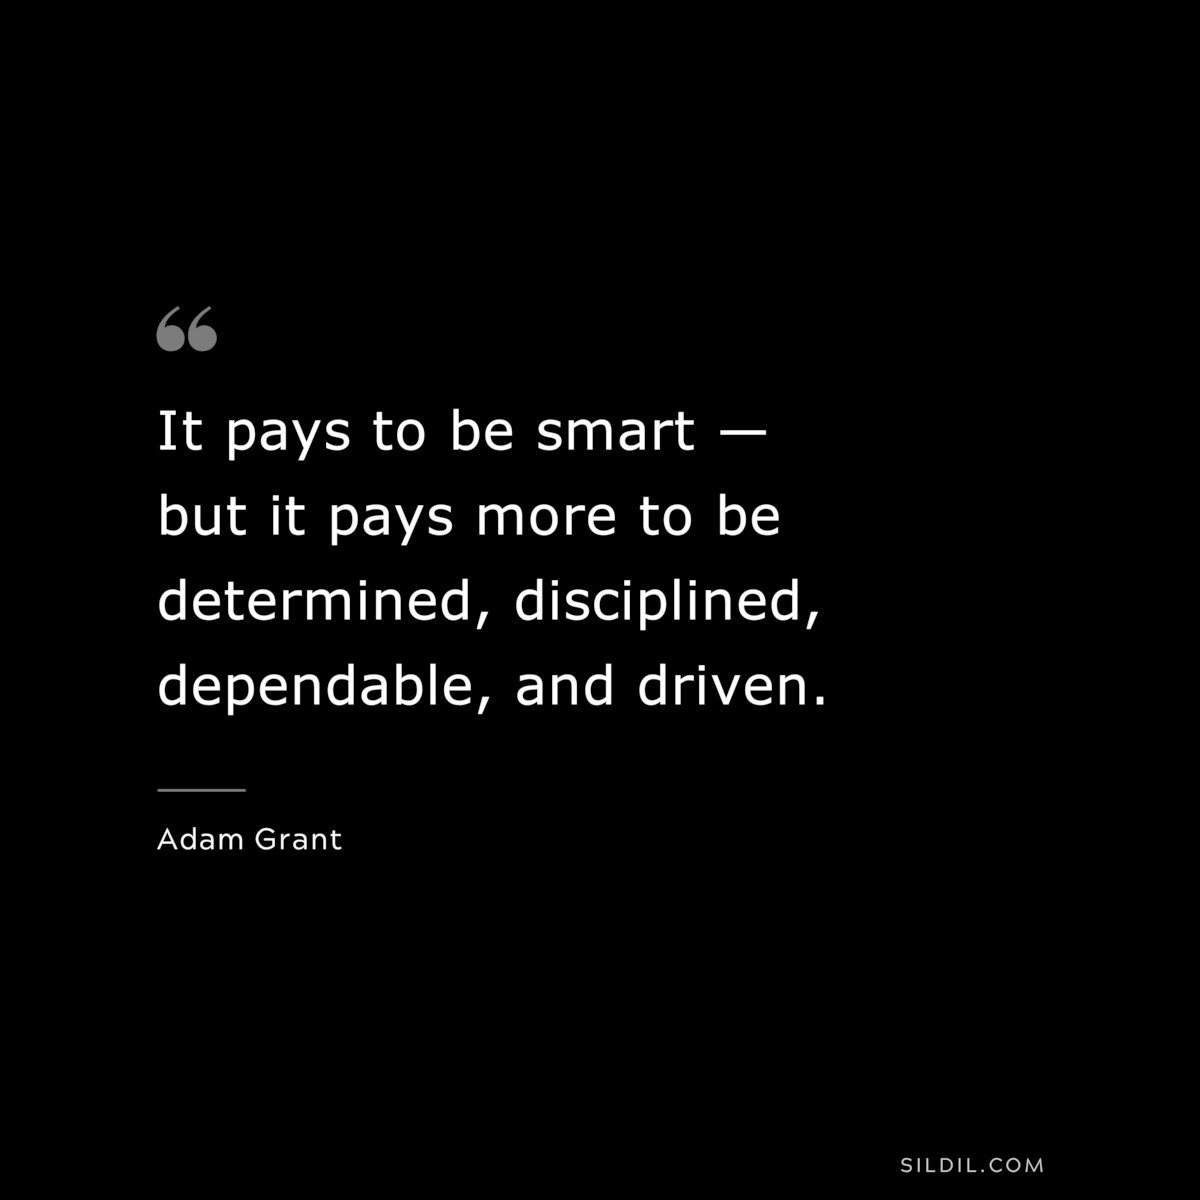 It pays to be smart — but it pays more to be determined, disciplined, dependable, and driven. ― Adam Grant